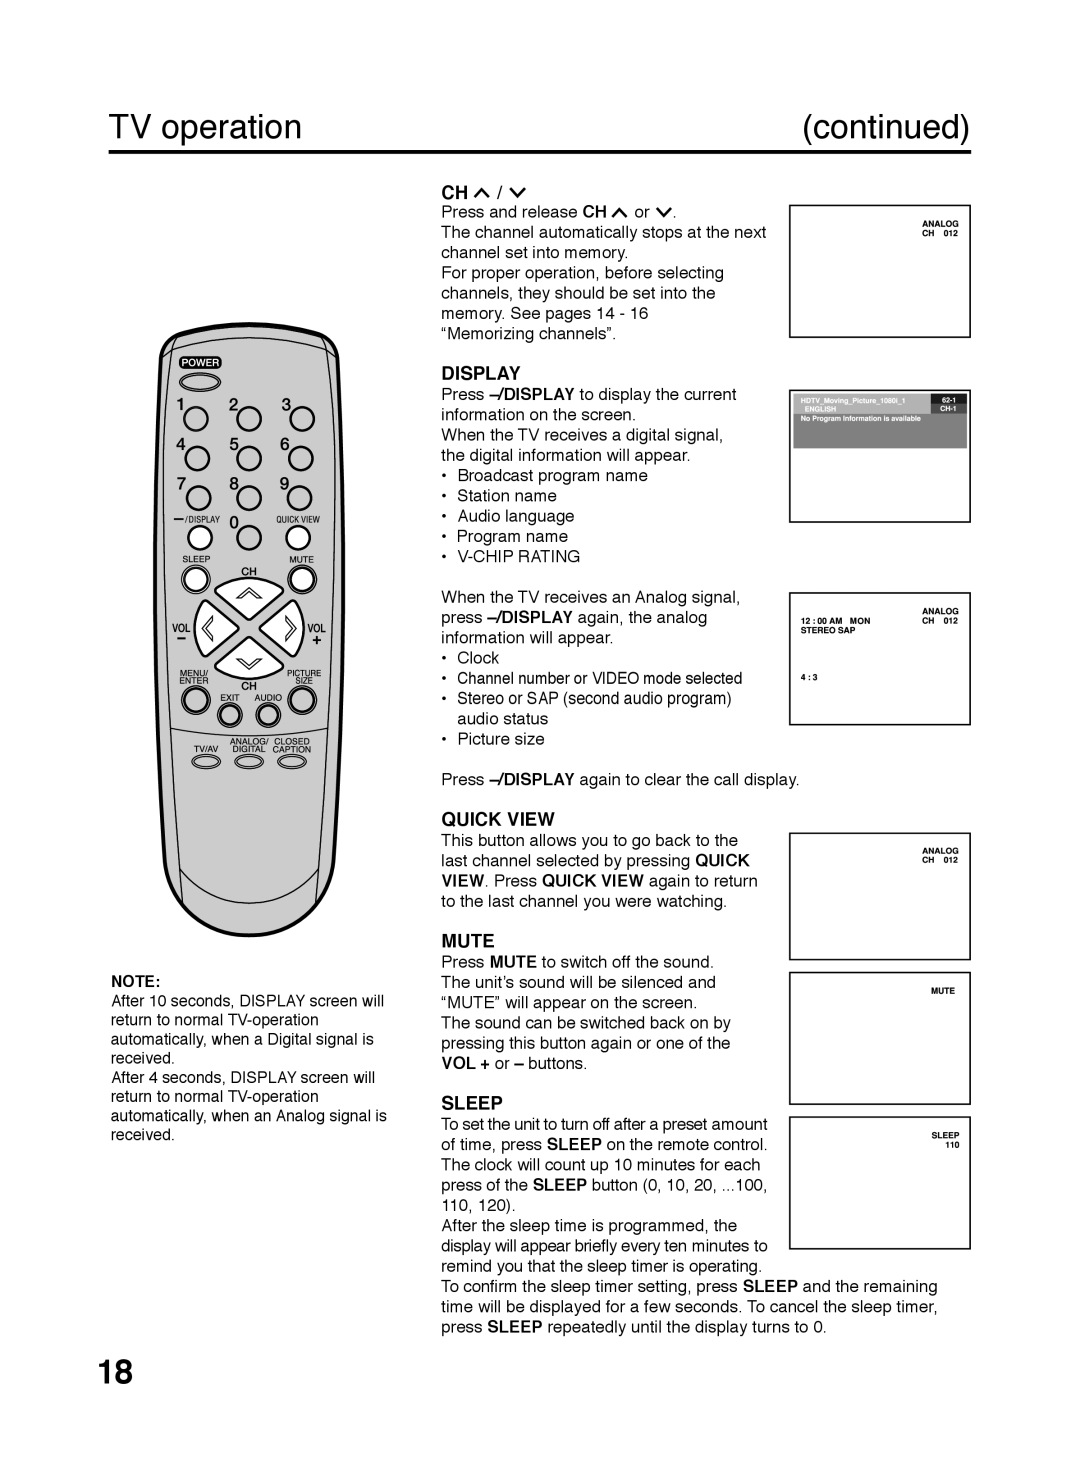 Zenith S2898A, C27H26B, 206-3923 warranty TV operation, continued, Display, Quick View, Mute, Sleep 